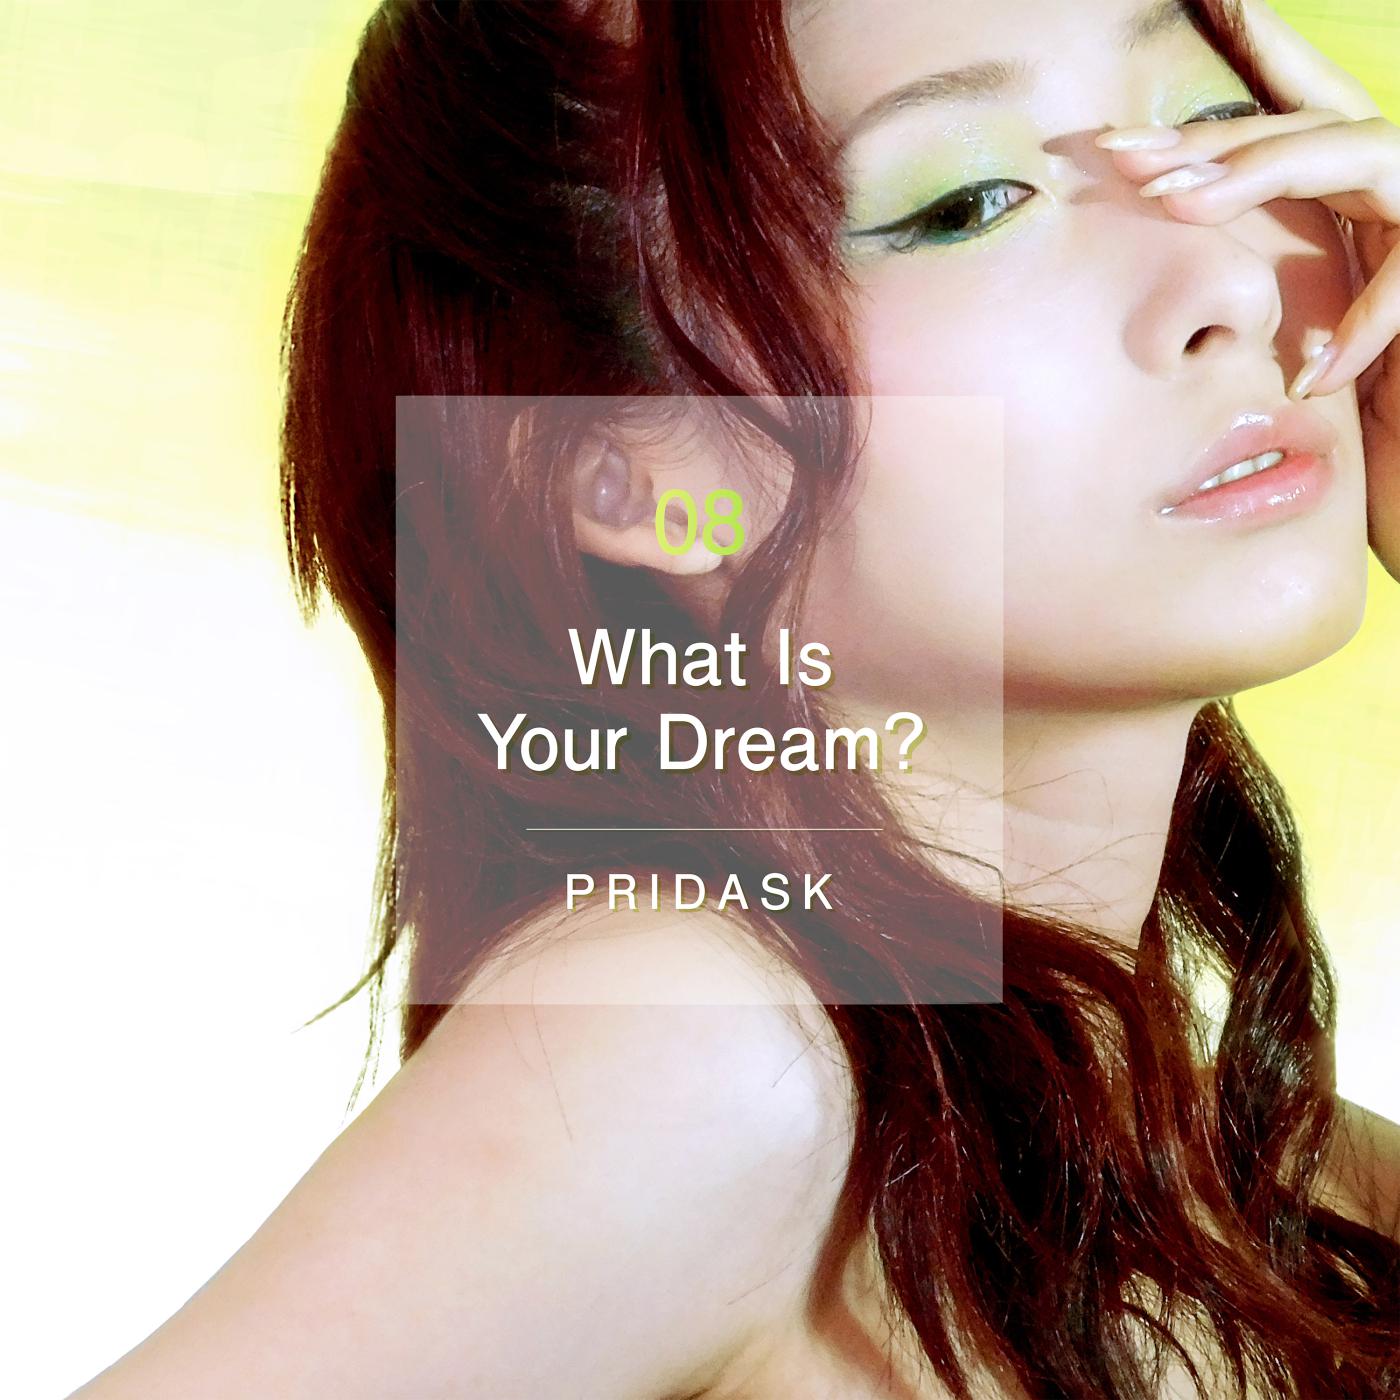 PRIDASK - What Is Your Dream?